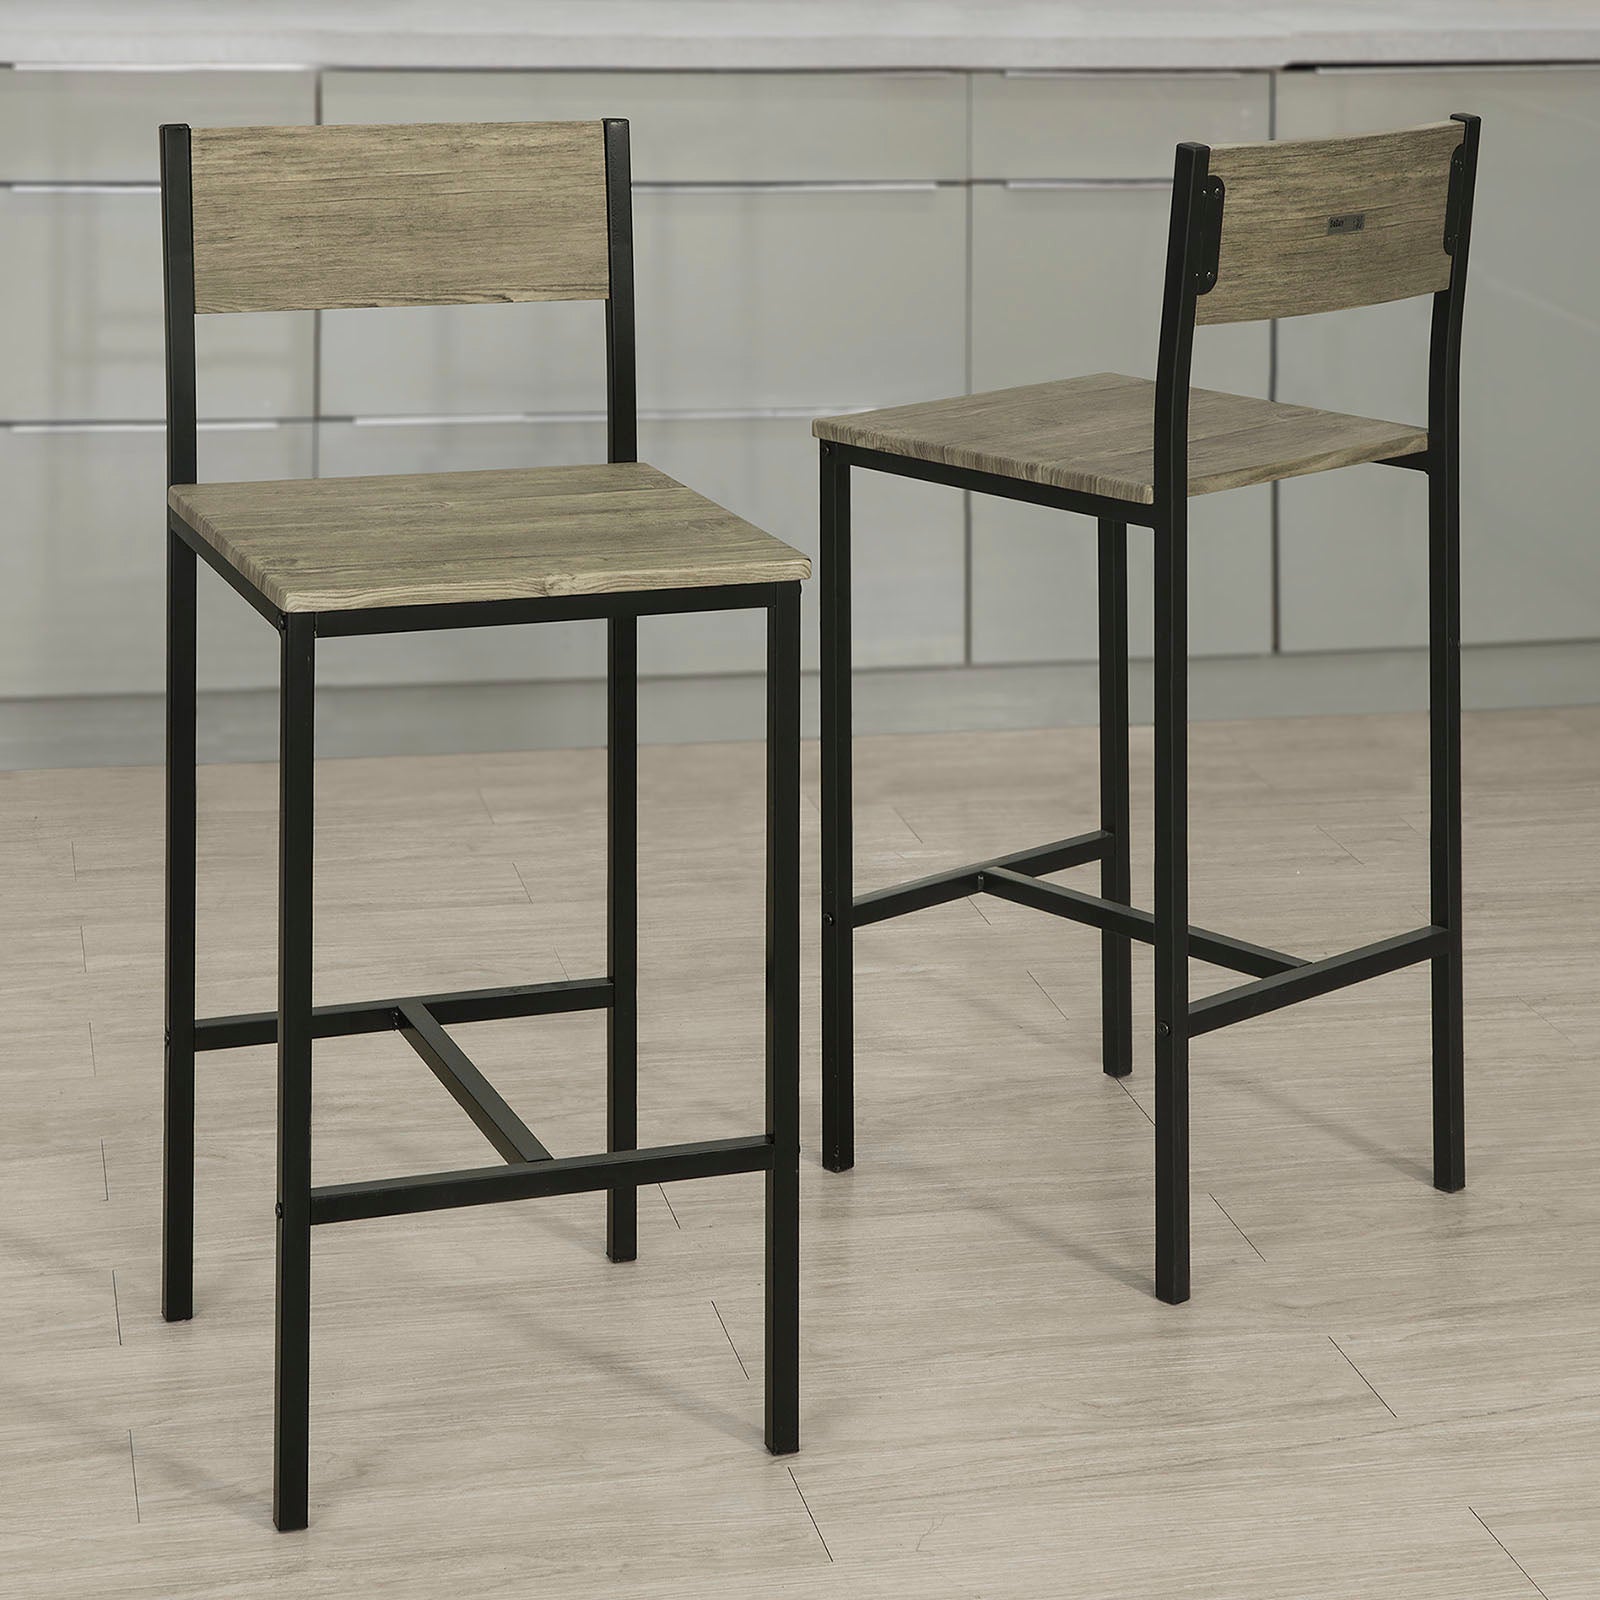 SoBuy Set of 2 High Back Kitchen Breakfast Dining Chairs,FST53x2